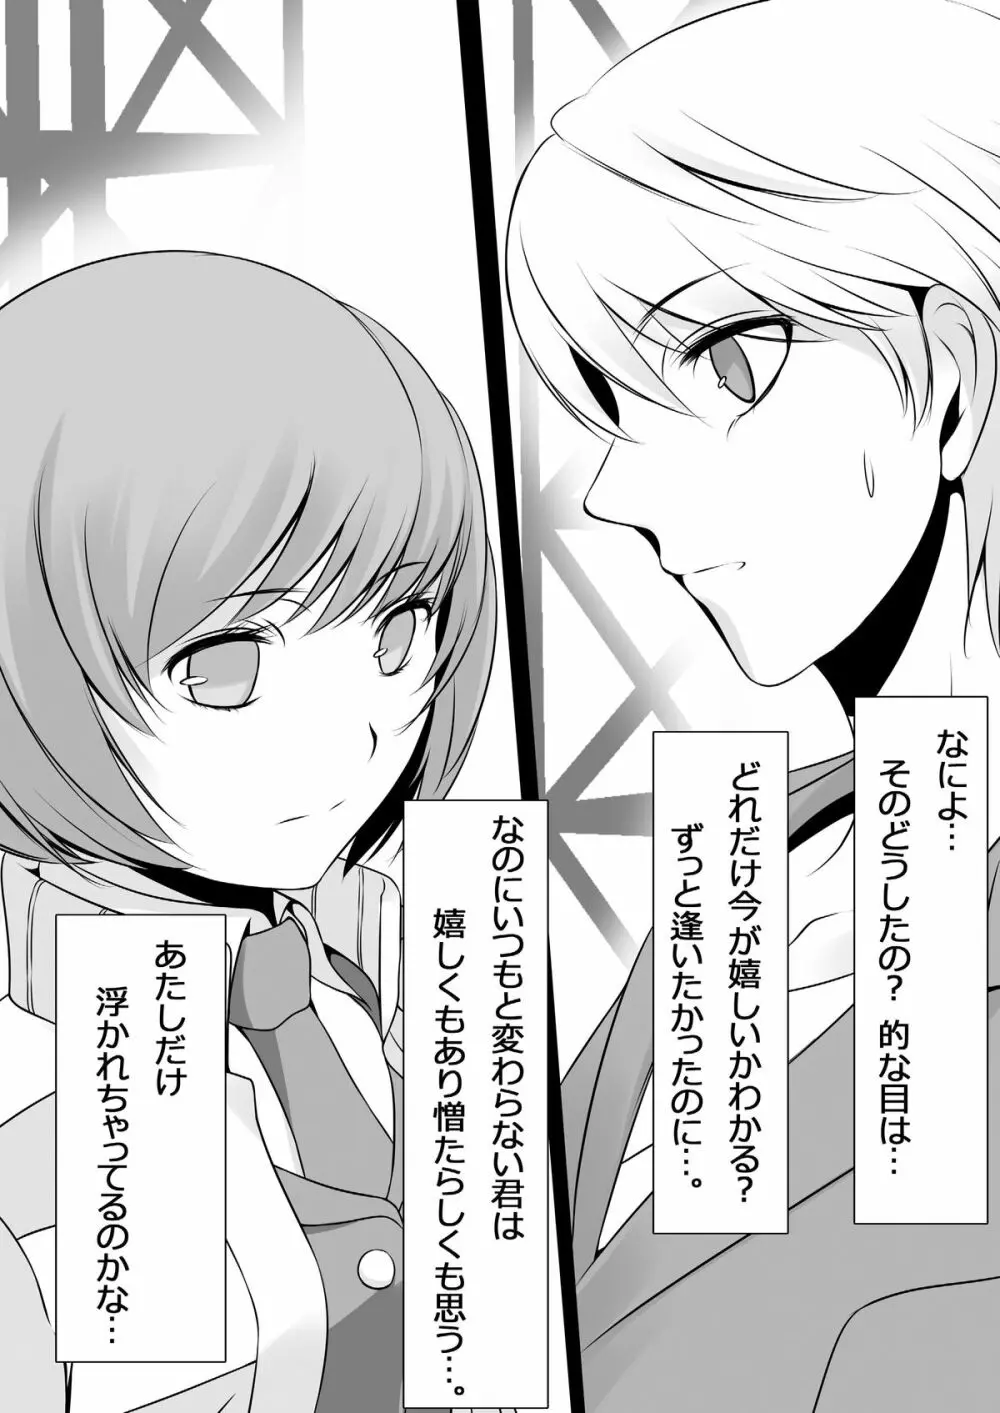 Persona 4: The Doujin #2 - page16